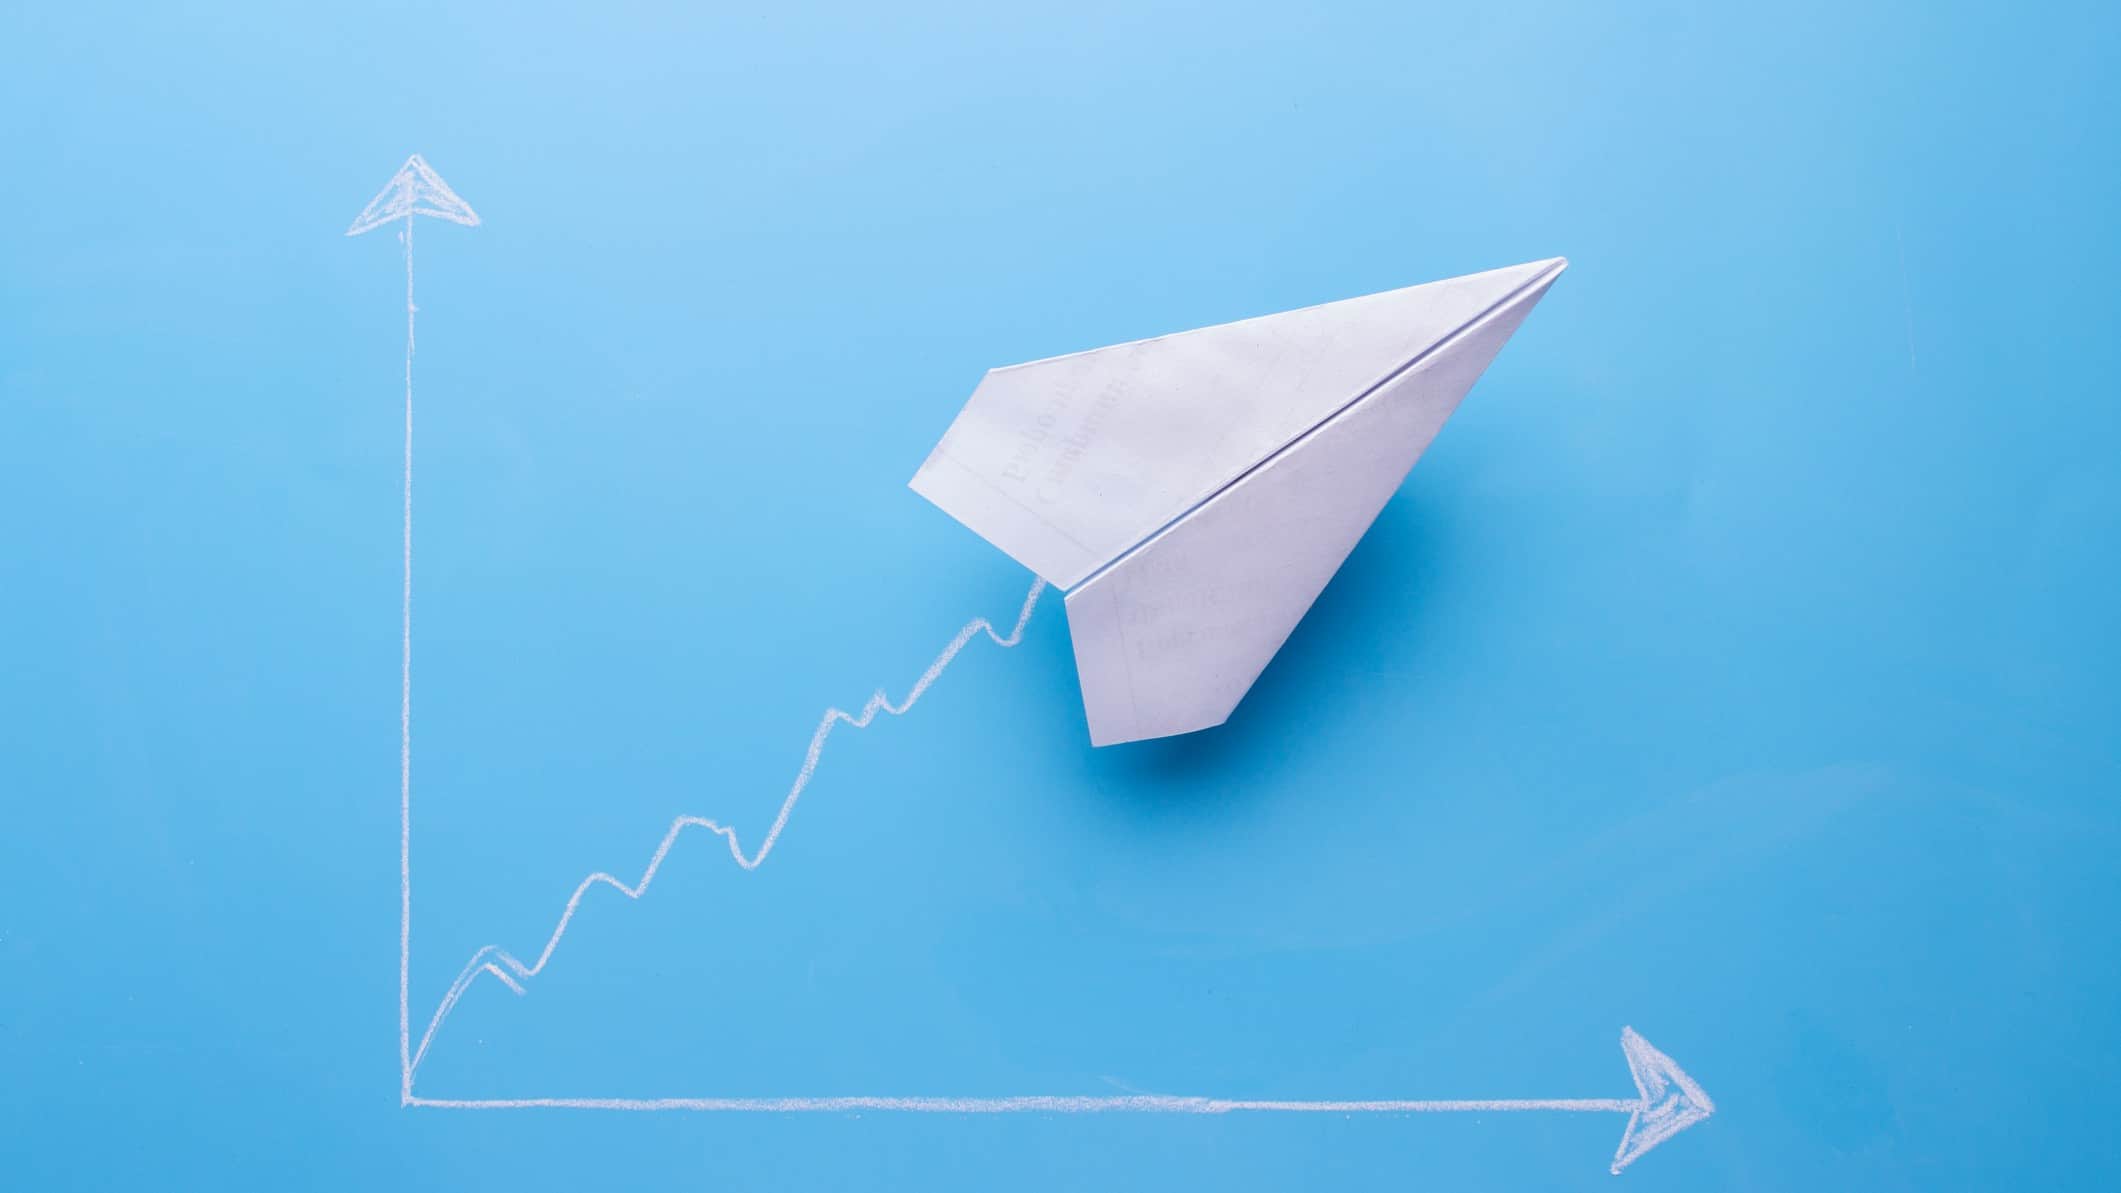 Paper aeroplane rising on a graph, symbolising a rising share price.